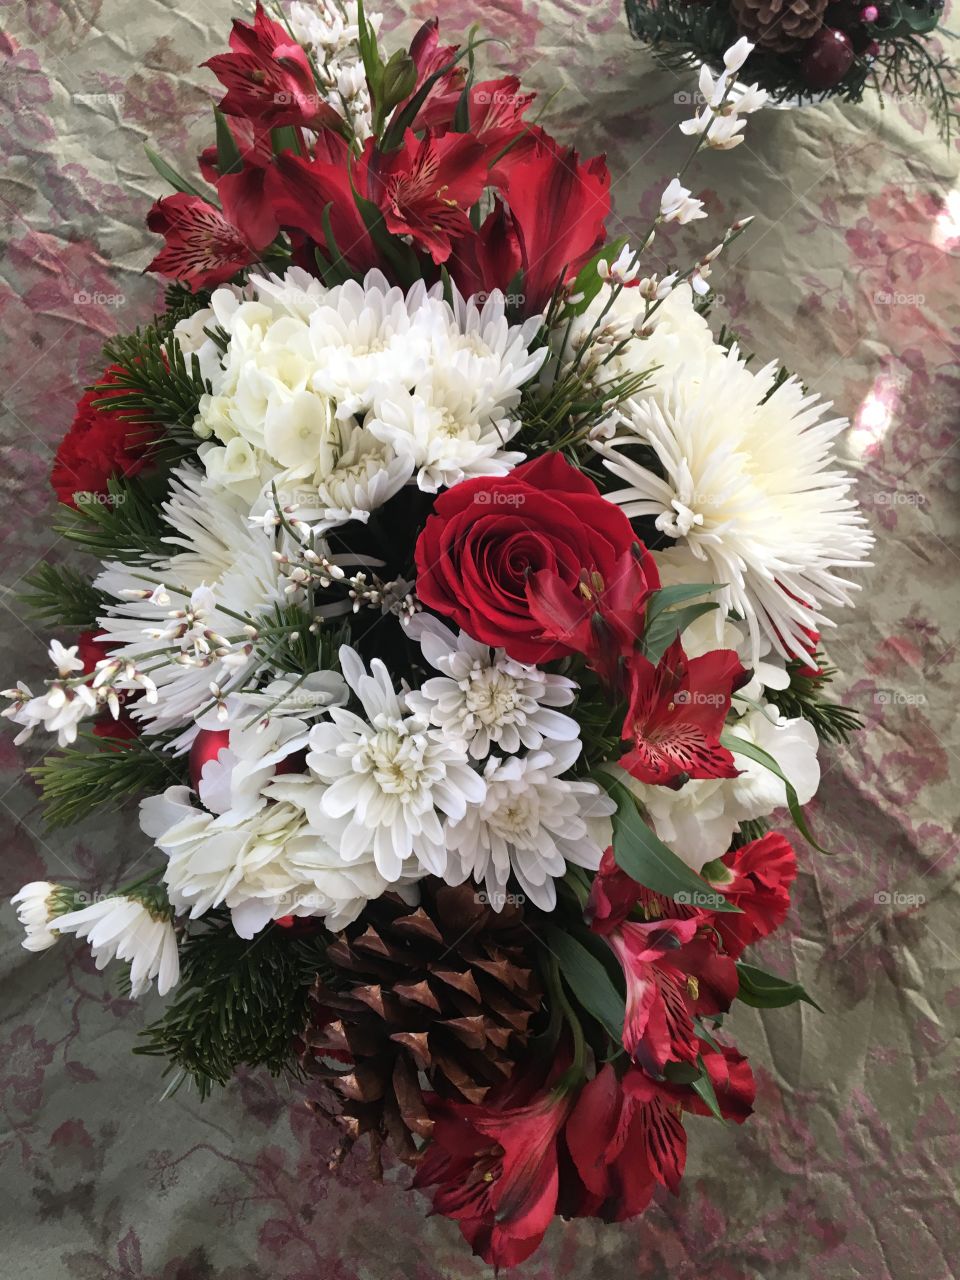 Cinnamon scented pinecones Christmas centerpiece red roses white pom-poms and alstroemeria